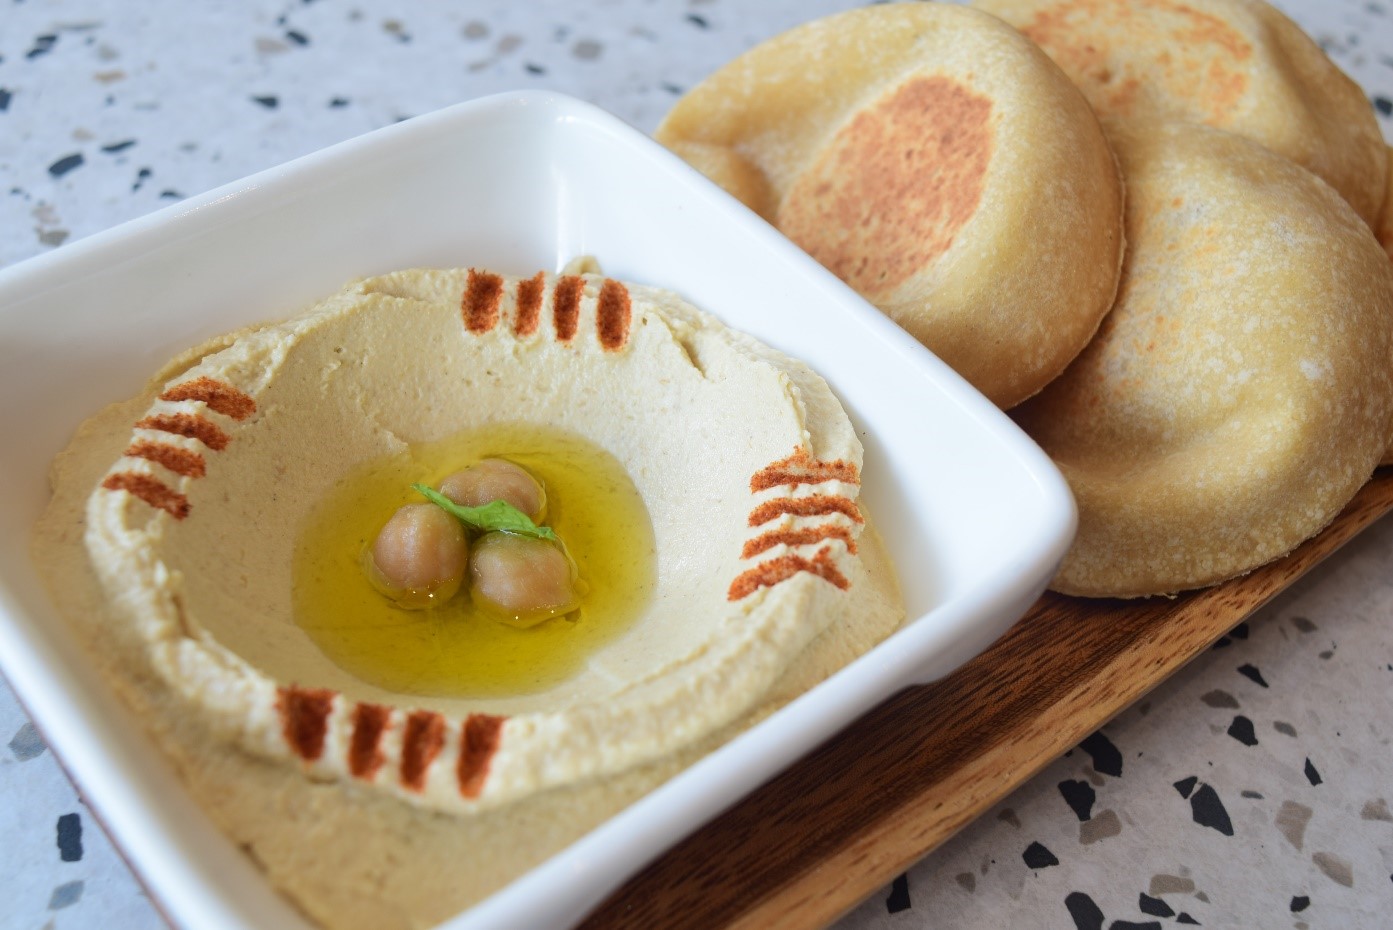 A popular Middle Eastern and Greek dish: chickpeas, tahini, spices, served with homemade whole wheat pita
Hummus + 4 Pita (P180)